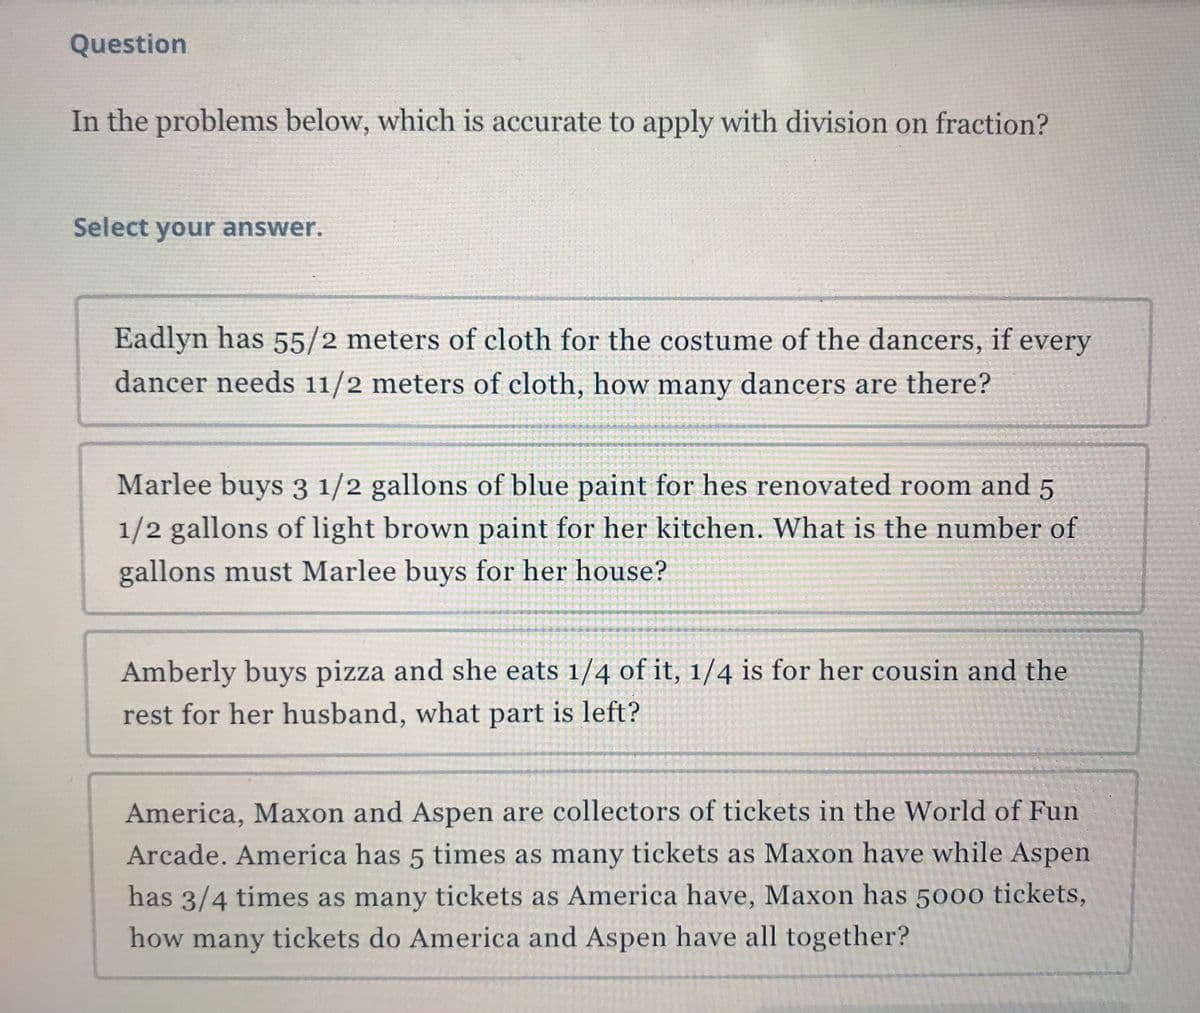 Question
In the problems below, which is accurate to apply with division on fraction?
Select your answer.
Eadlyn has 55/2 meters of cloth for the costume of the dancers, if every
dancer needs 11/2 meters of cloth, how many dancers are there?
Marlee buys 3 1/2 gallons of blue paint for hes renovated room and 5
1/2 gallons of light brown paint for her kitchen. What is the number of
gallons must Marlee buys for her house?
Amberly buys pizza and she eats 1/4 of it, 1/4 is for her cousin and the
rest for her husband, what part is left?
America, Maxon and Aspen are collectors of tickets in the World of Fun
Arcade. America has 5 times as many tickets as Maxon have while Aspen
has 3/4 times as many tickets as America have, Maxon has 5000 tickets,
how many tickets do America and Aspen have all together?
